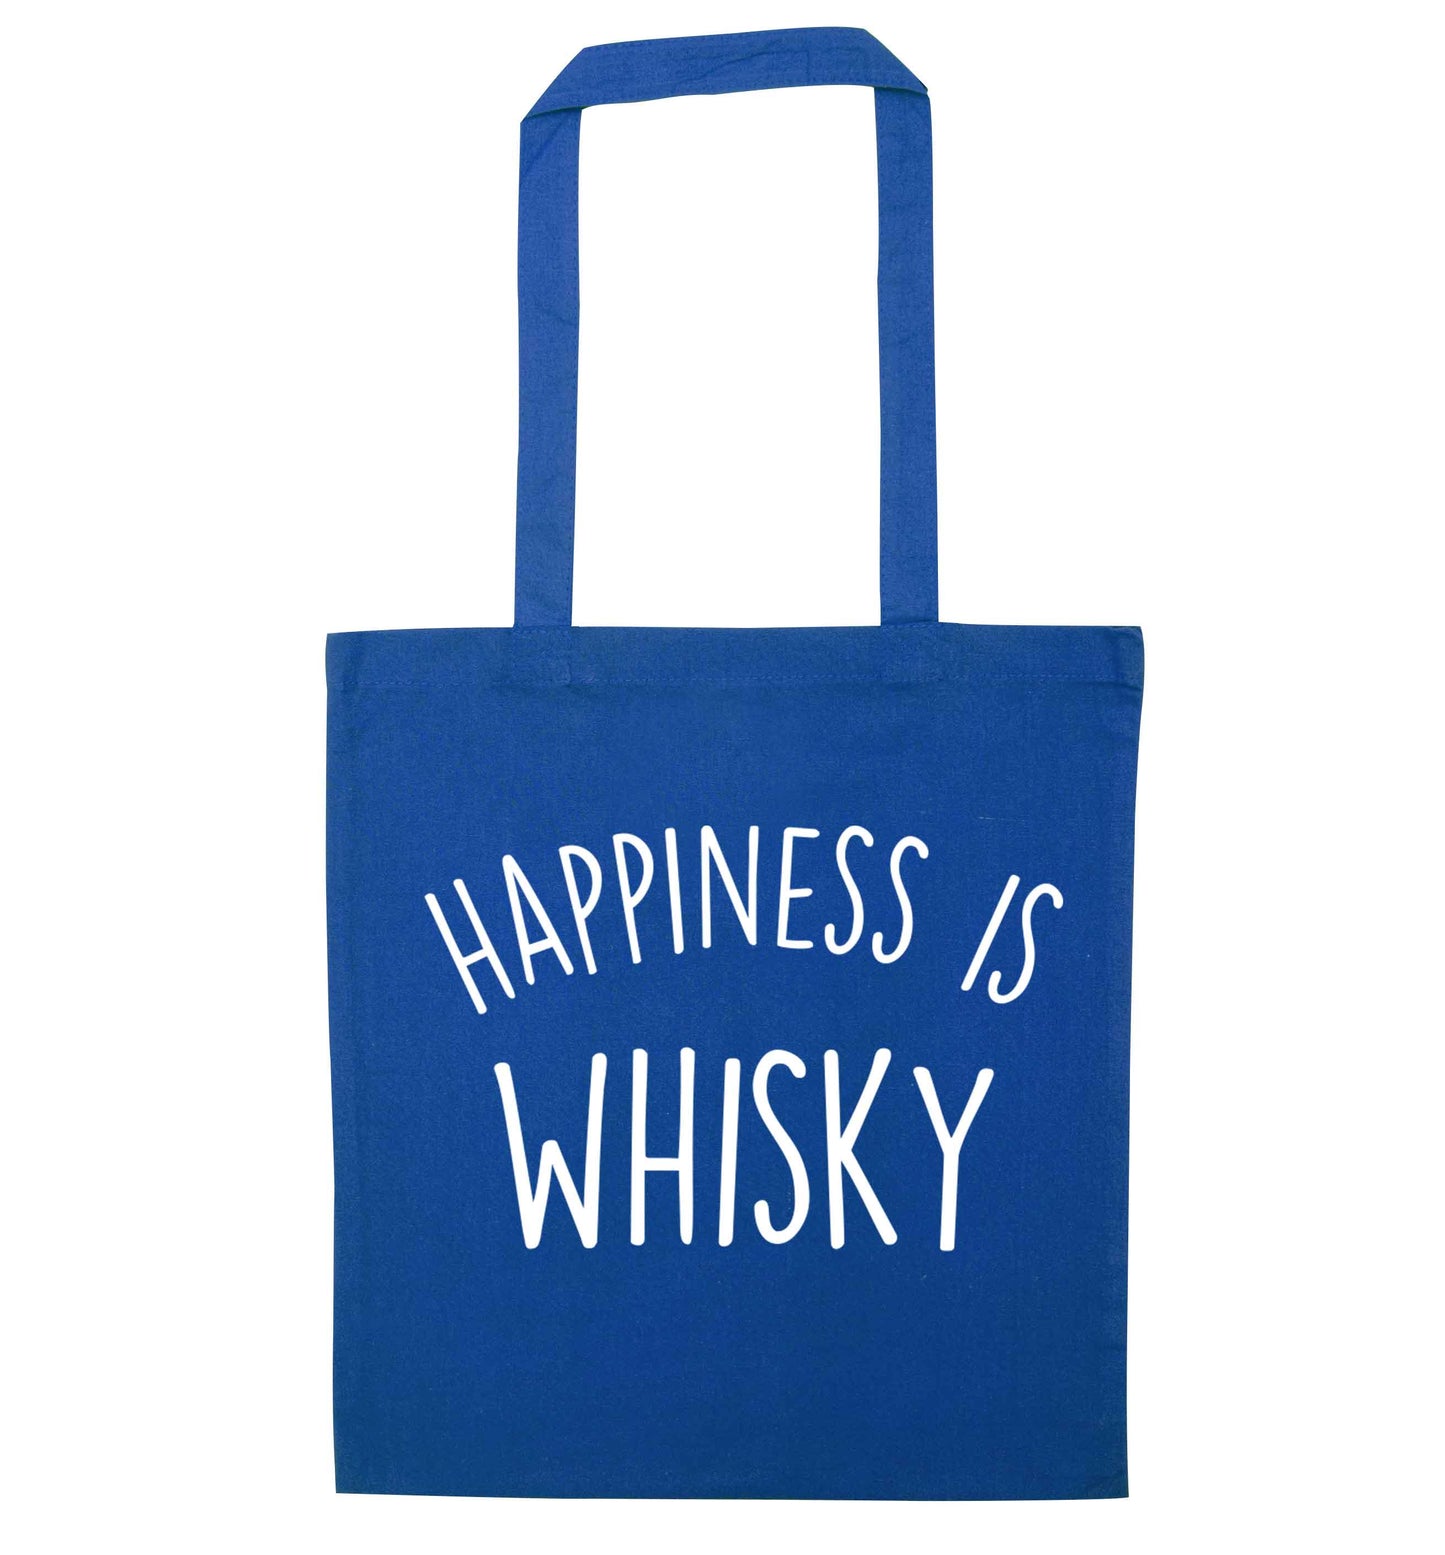 Happiness is whisky blue tote bag